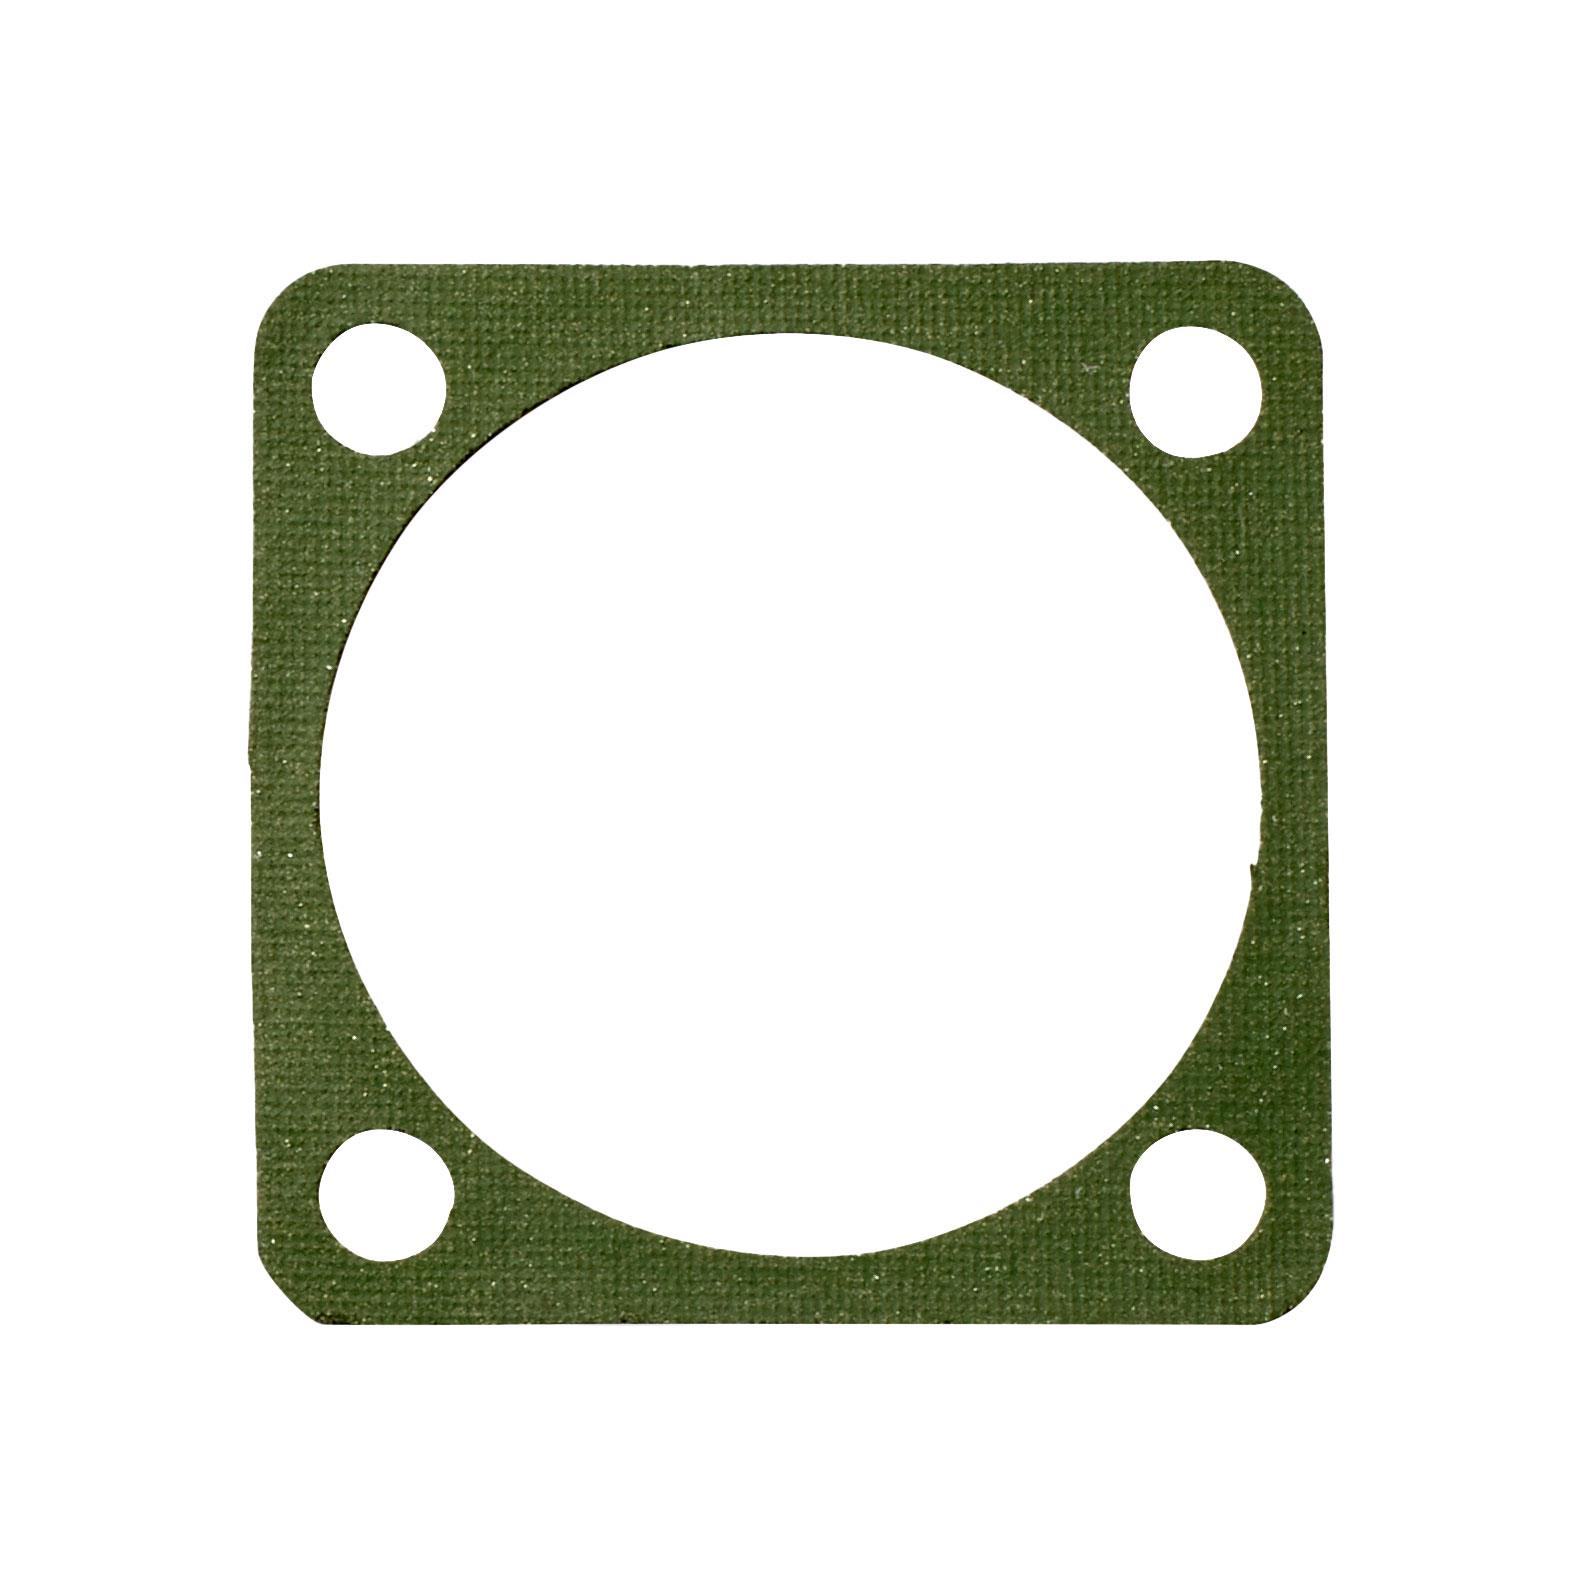 【VG9694006B016A】ELECTRICALLY CONDUCTIVE GASKETS